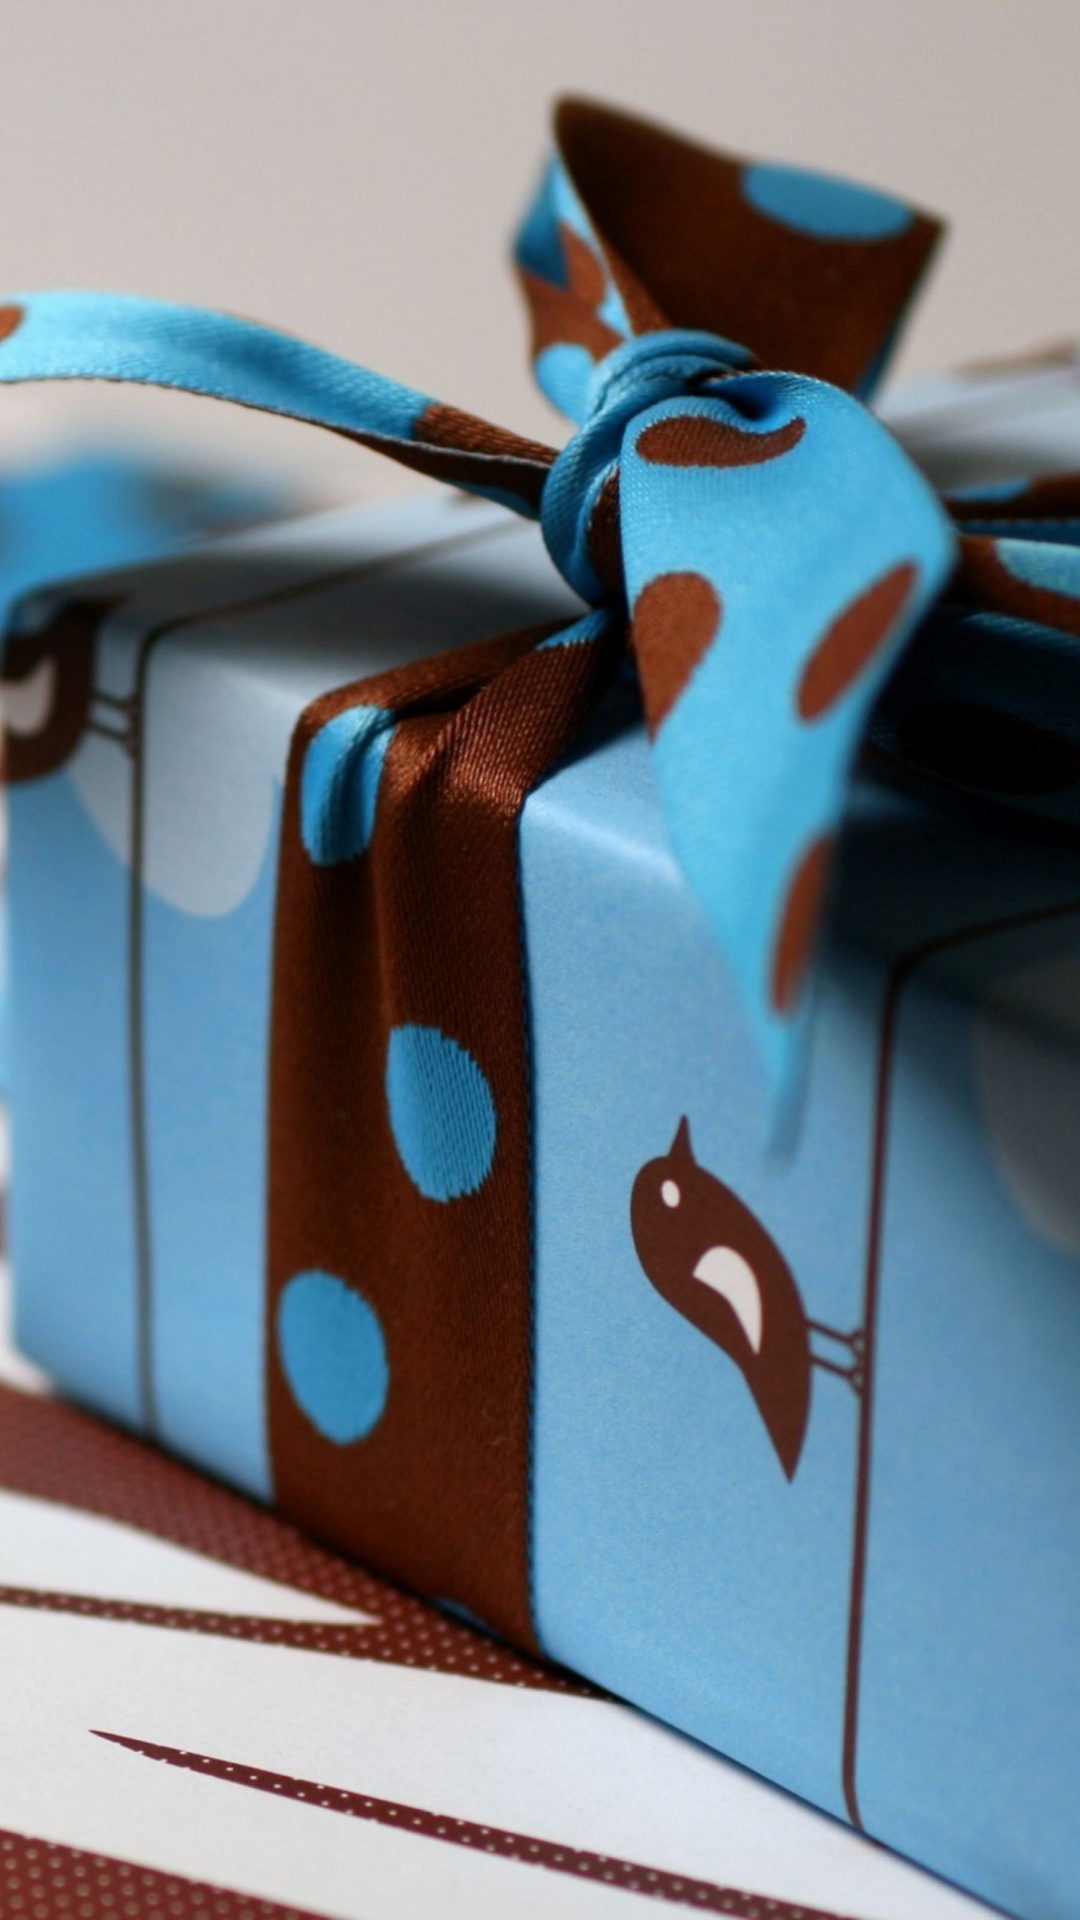 Gift, Box, Ribbon, Blue, Turquoise. Wallpaper in 1080x1920 Resolution